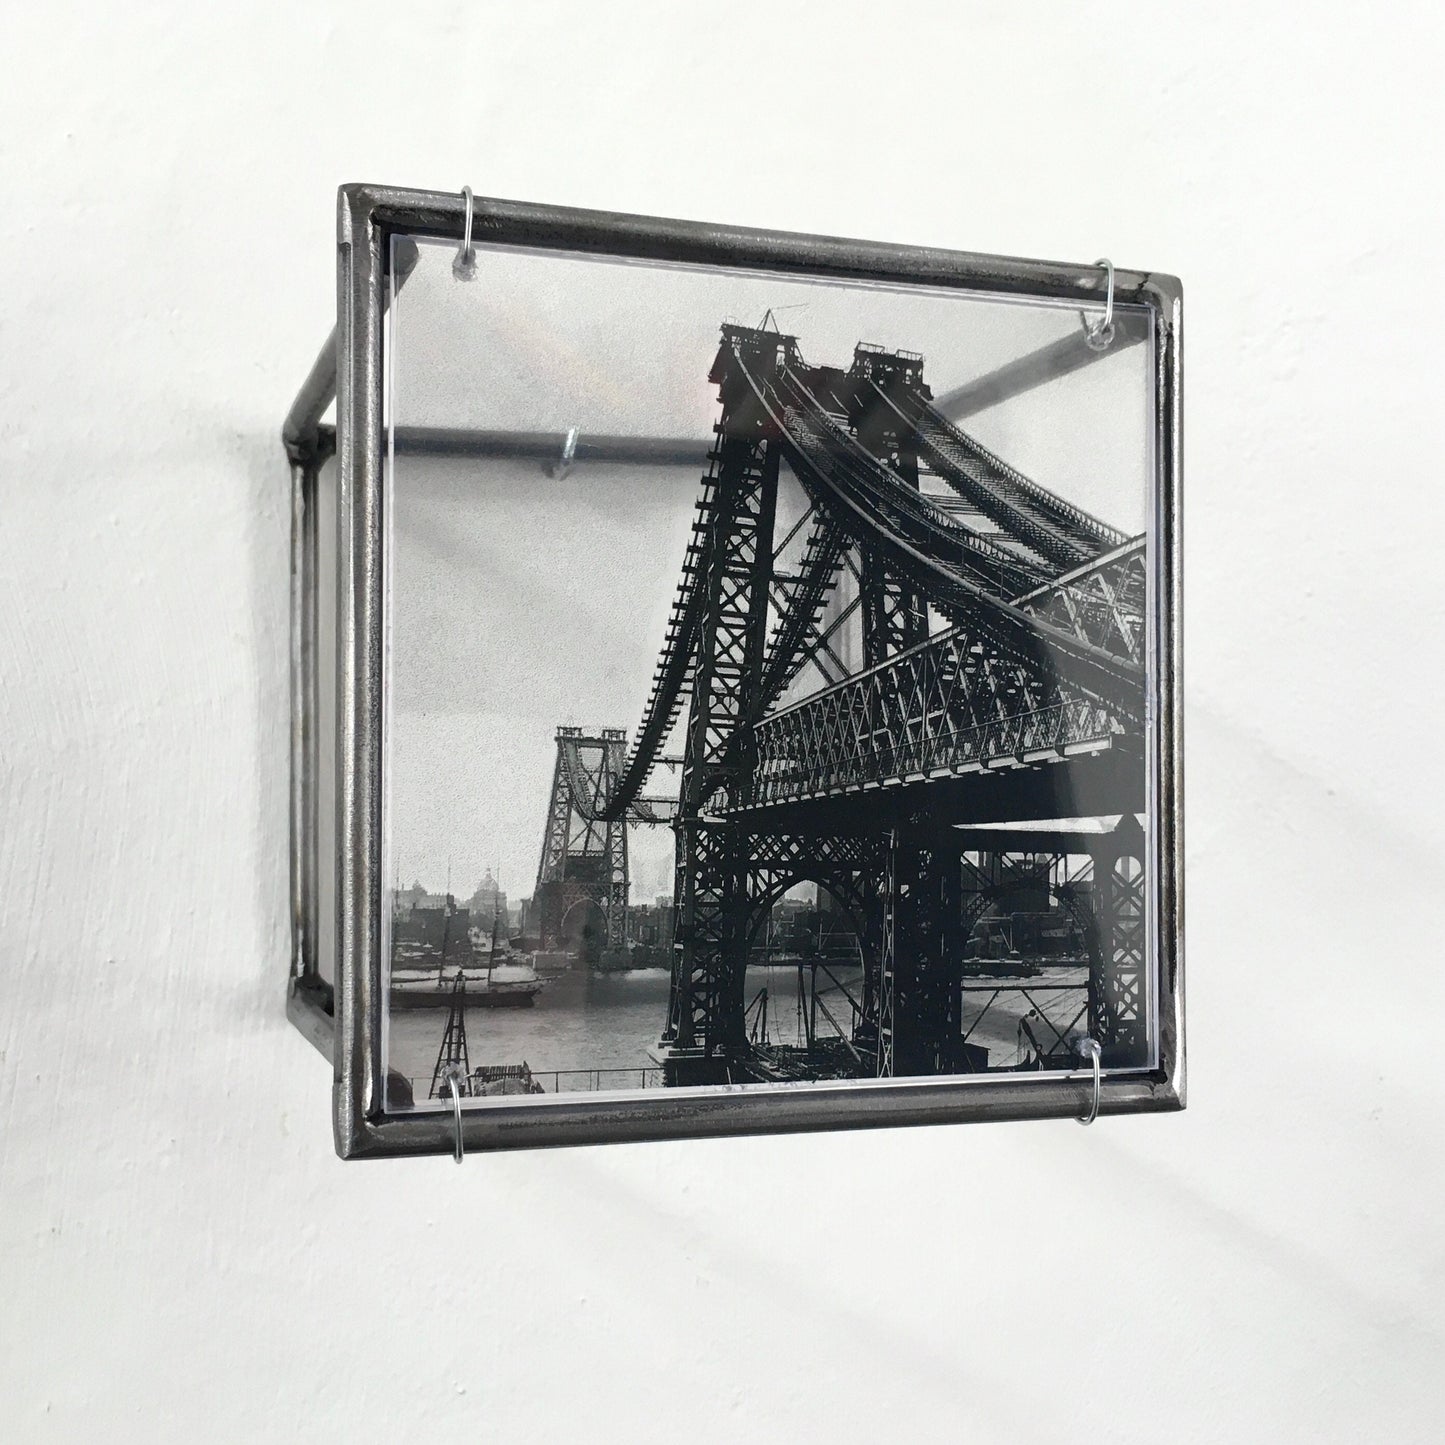 Williamsburg Bridge - Designer wall sculpture with engineering and architectural image. New home gift artandshadow sculpture New York